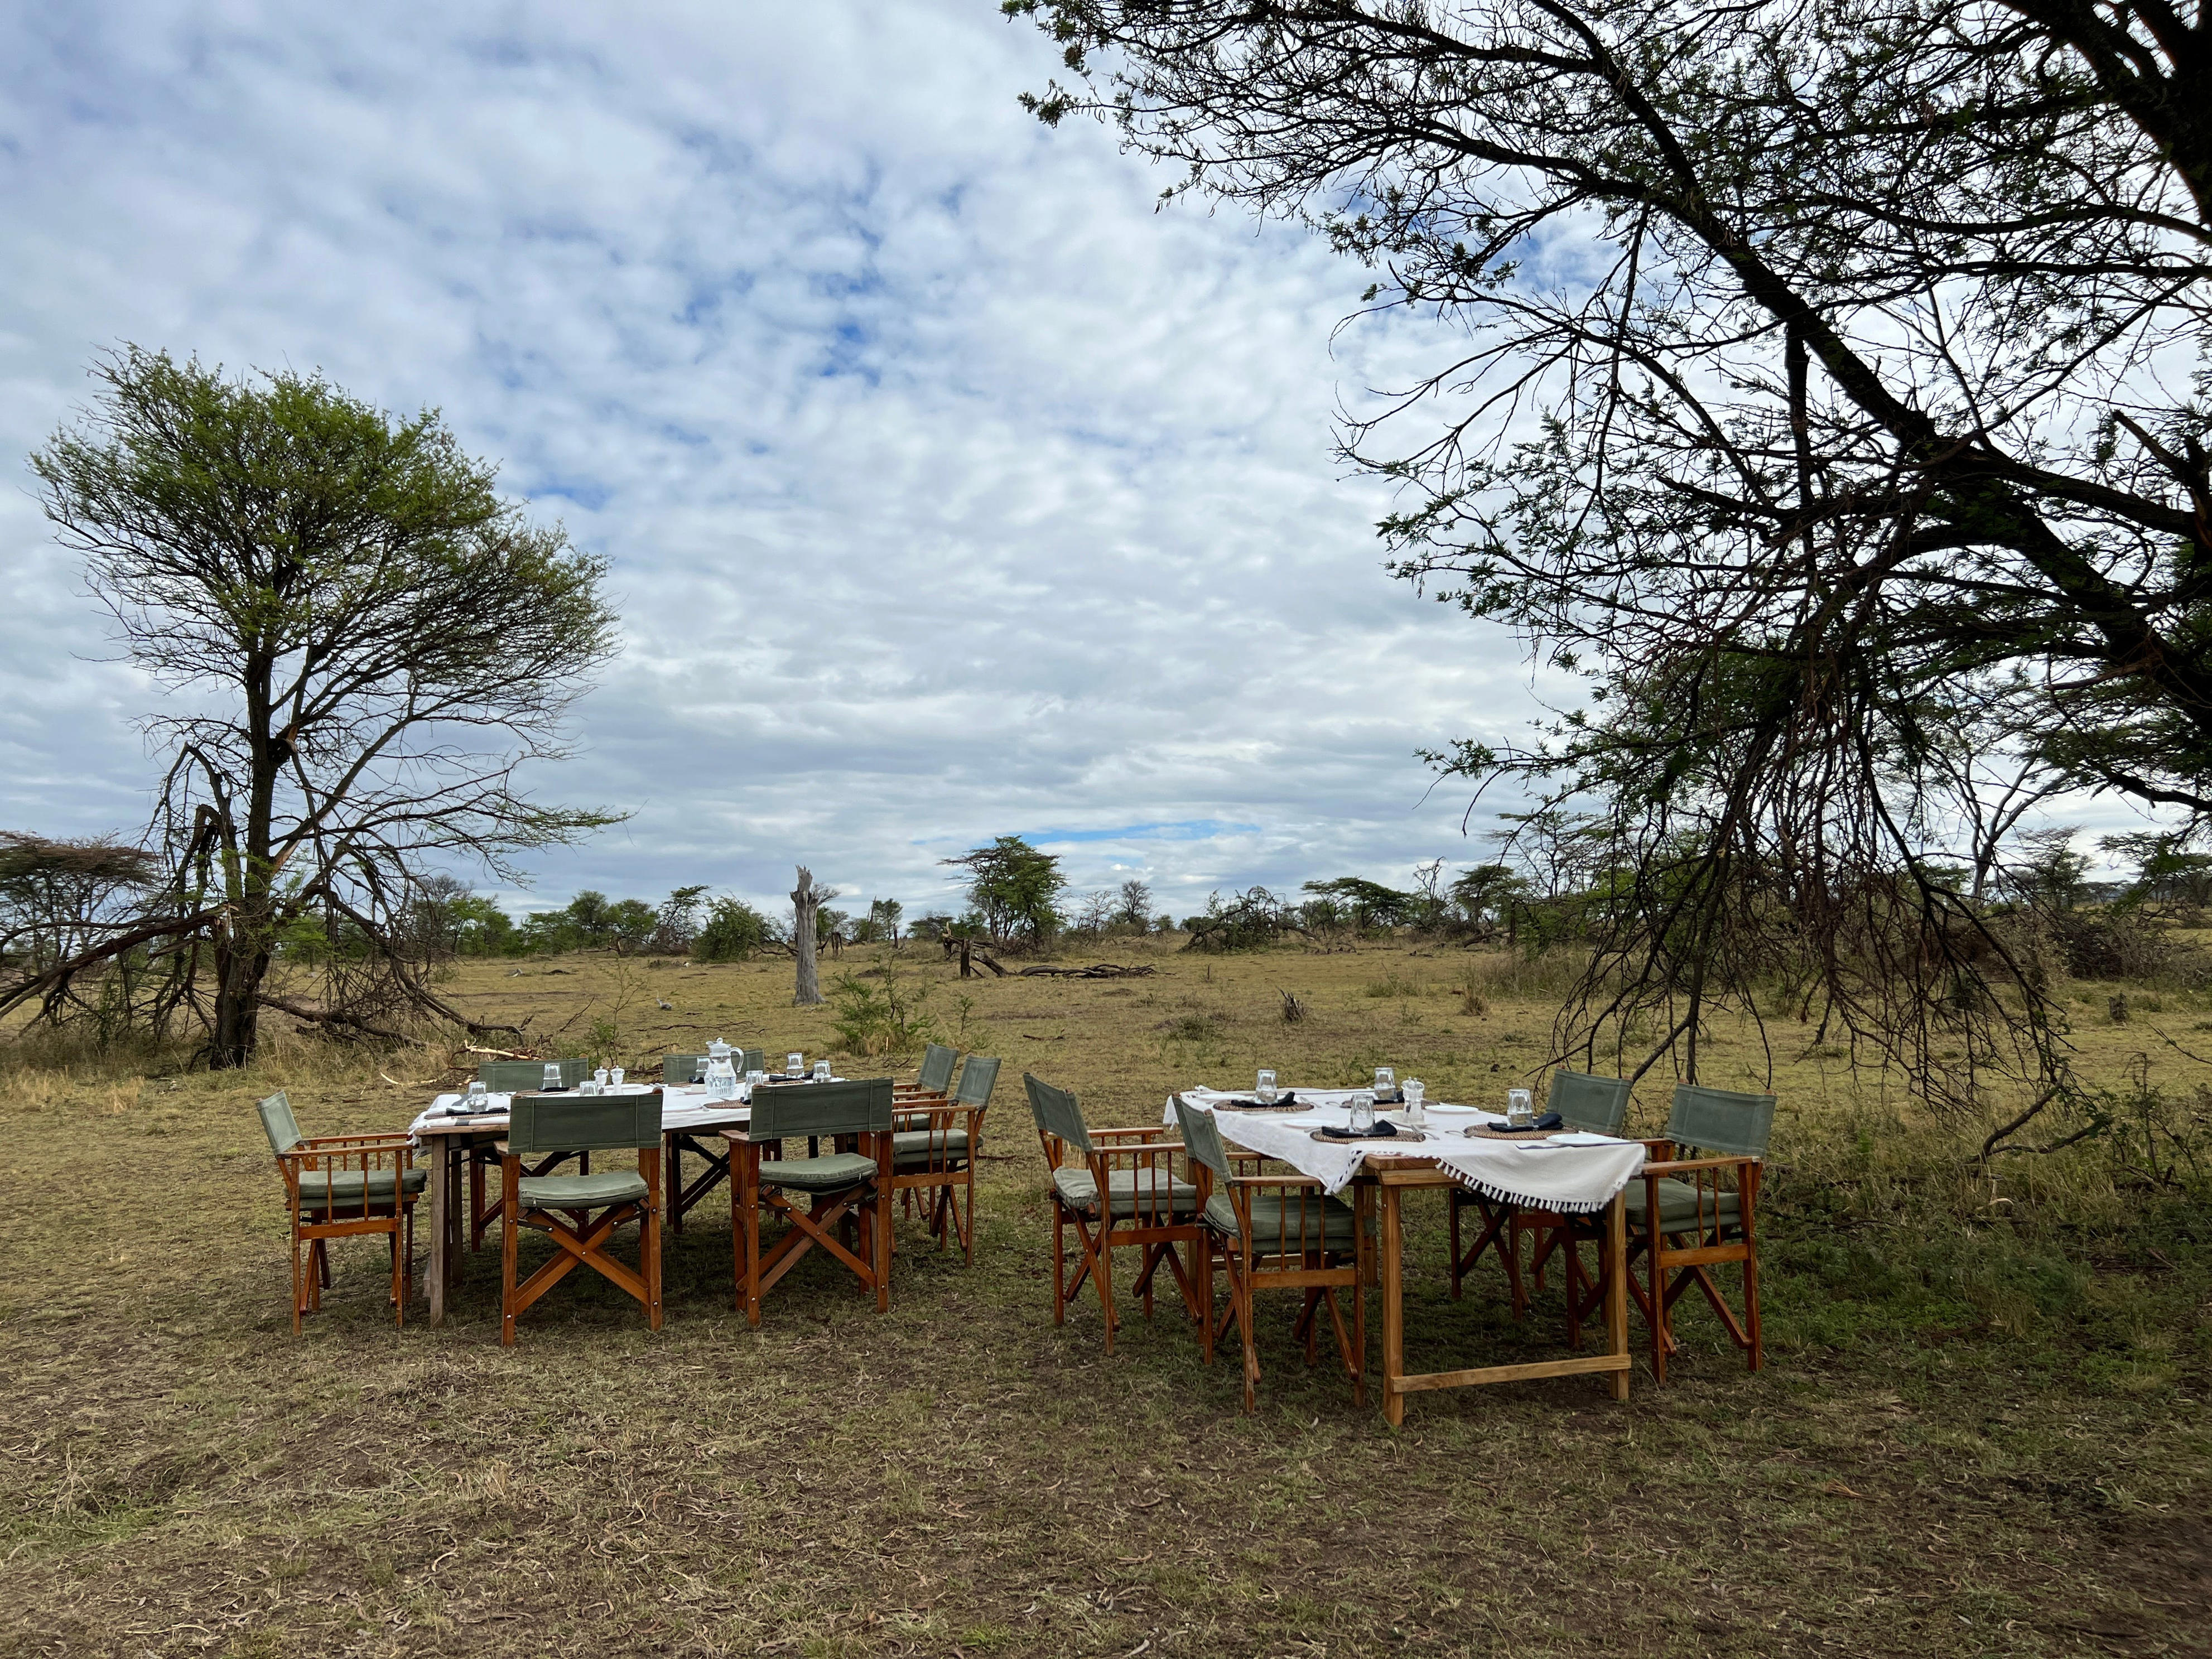 <p>On one day of the trip, we had a special bush breakfast. It was one of the extra activities we got with that special add-on package.</p><p>Instead of our usual safari breakfast, we had freshly prepared omelets in the wild.</p>